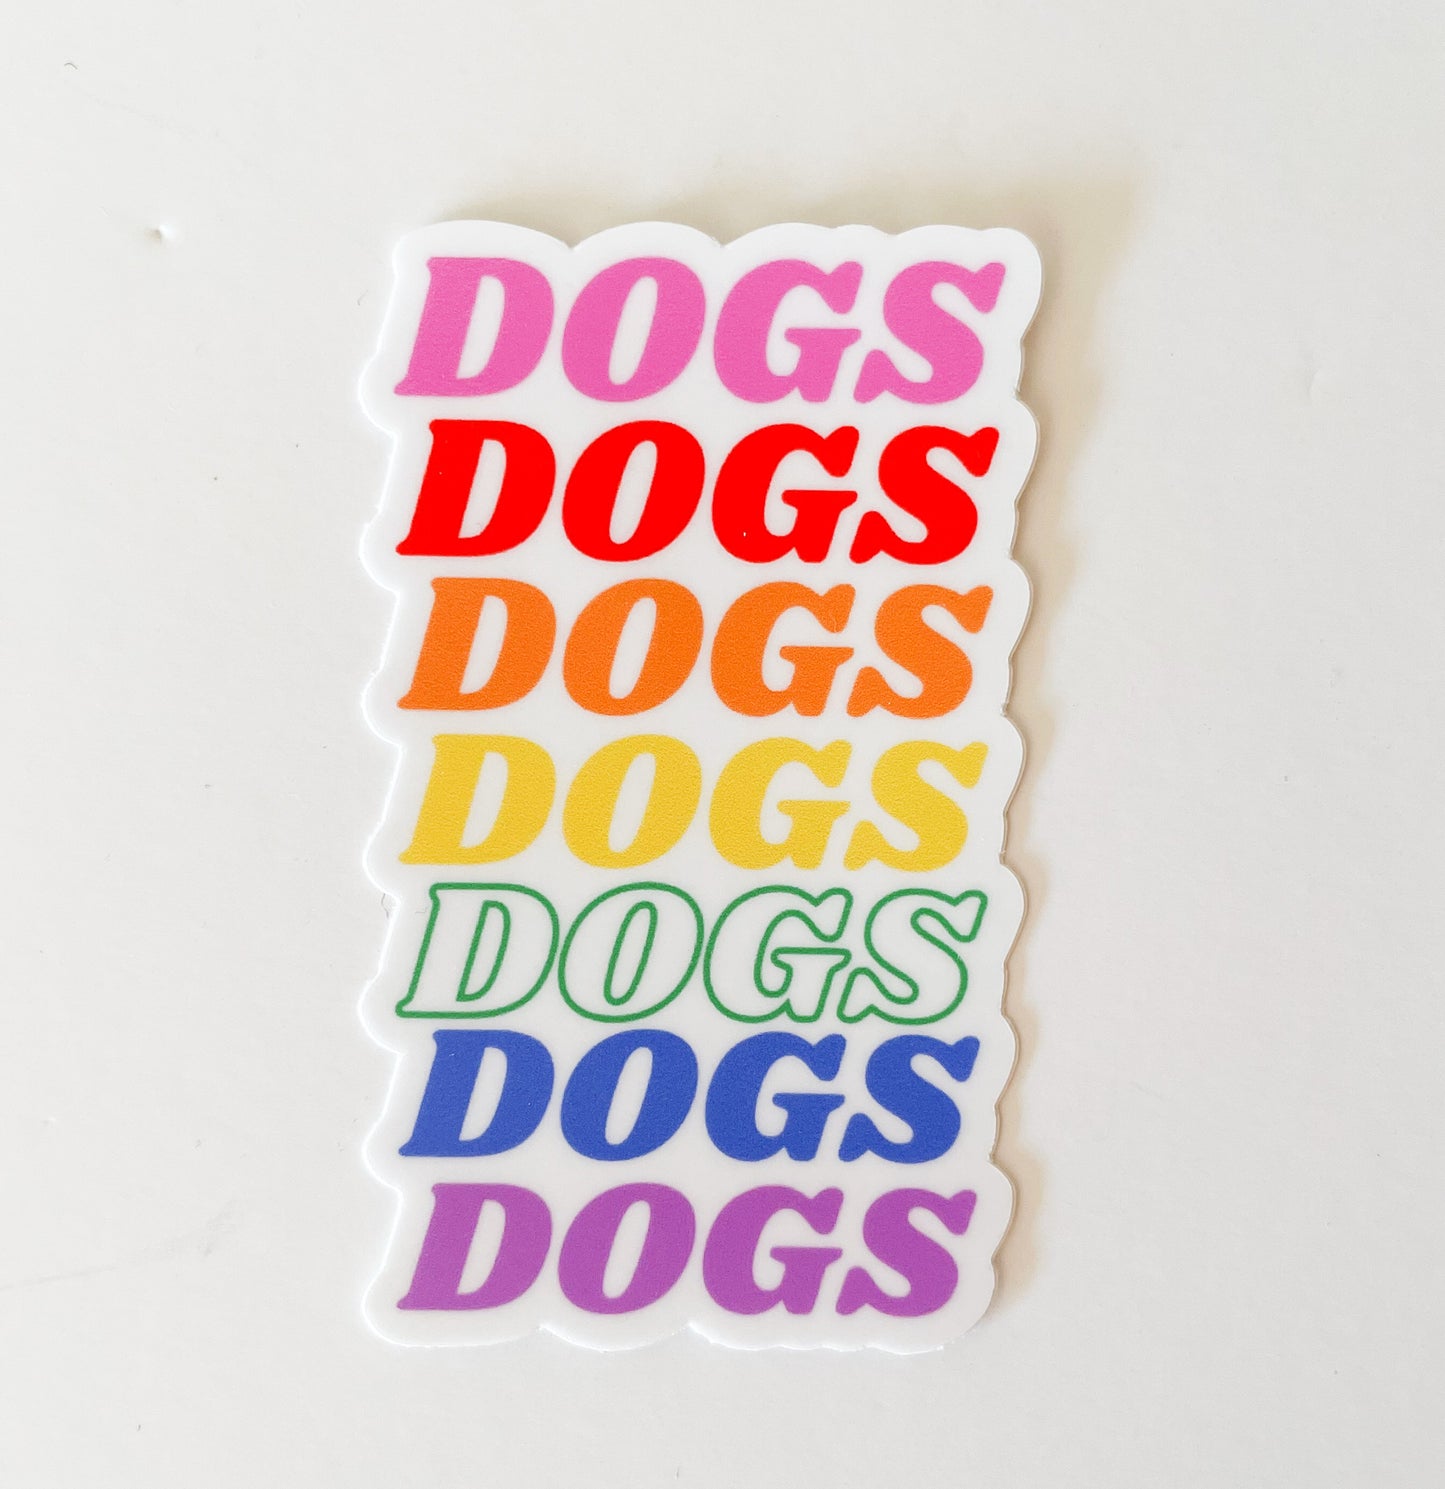 DOGS, DOGS, DOGS STICKER